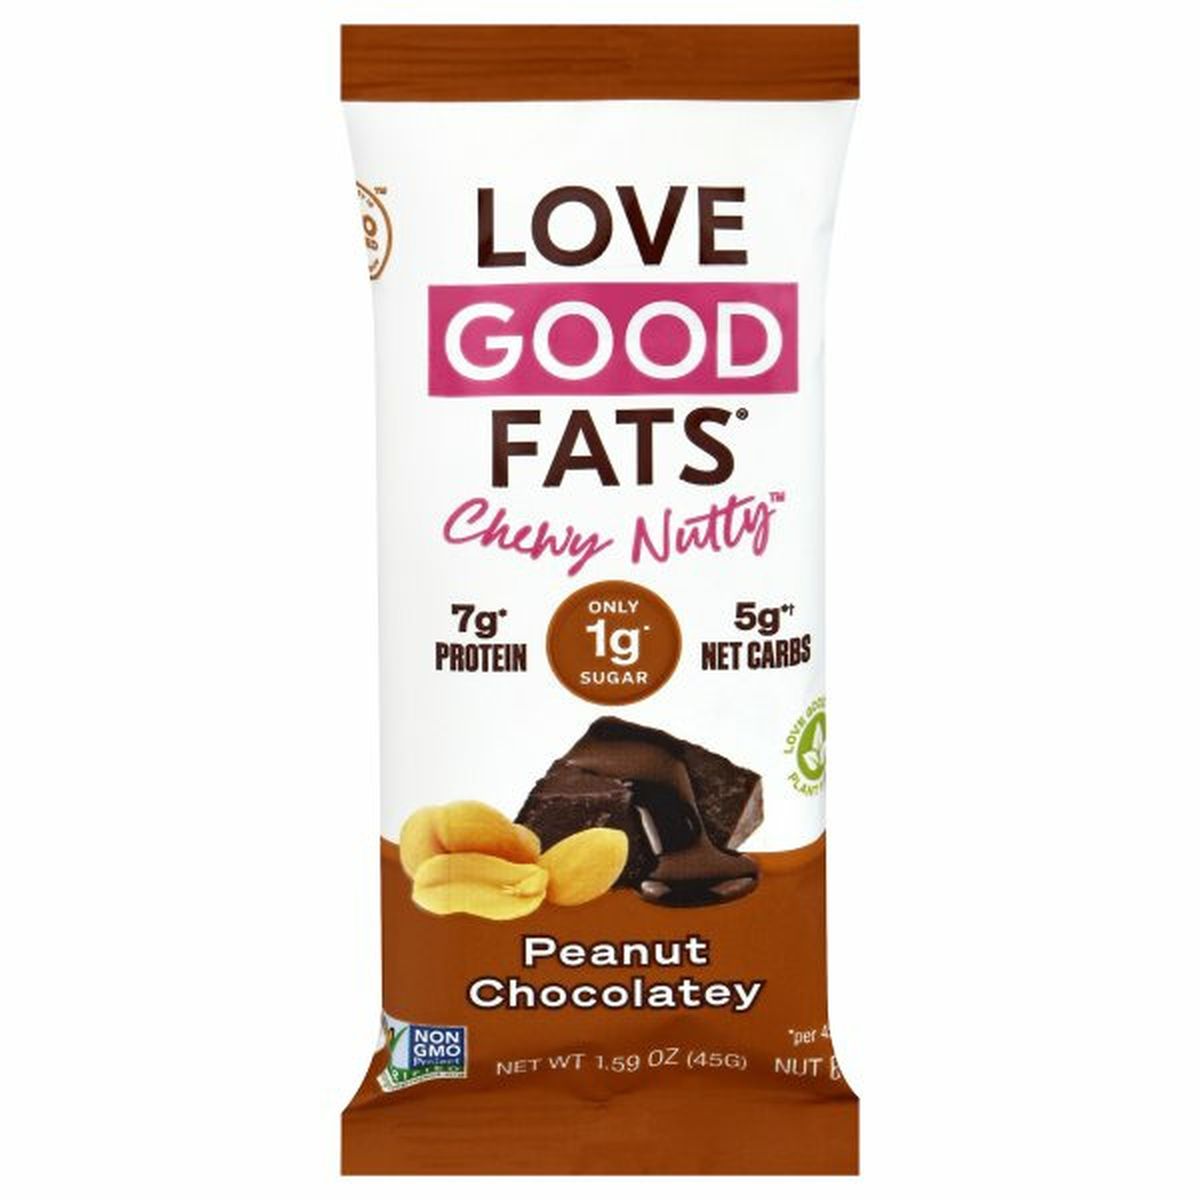 Calories in Love Good Fats Chewy Nutty Nut Bar, Peanut Chocolatey